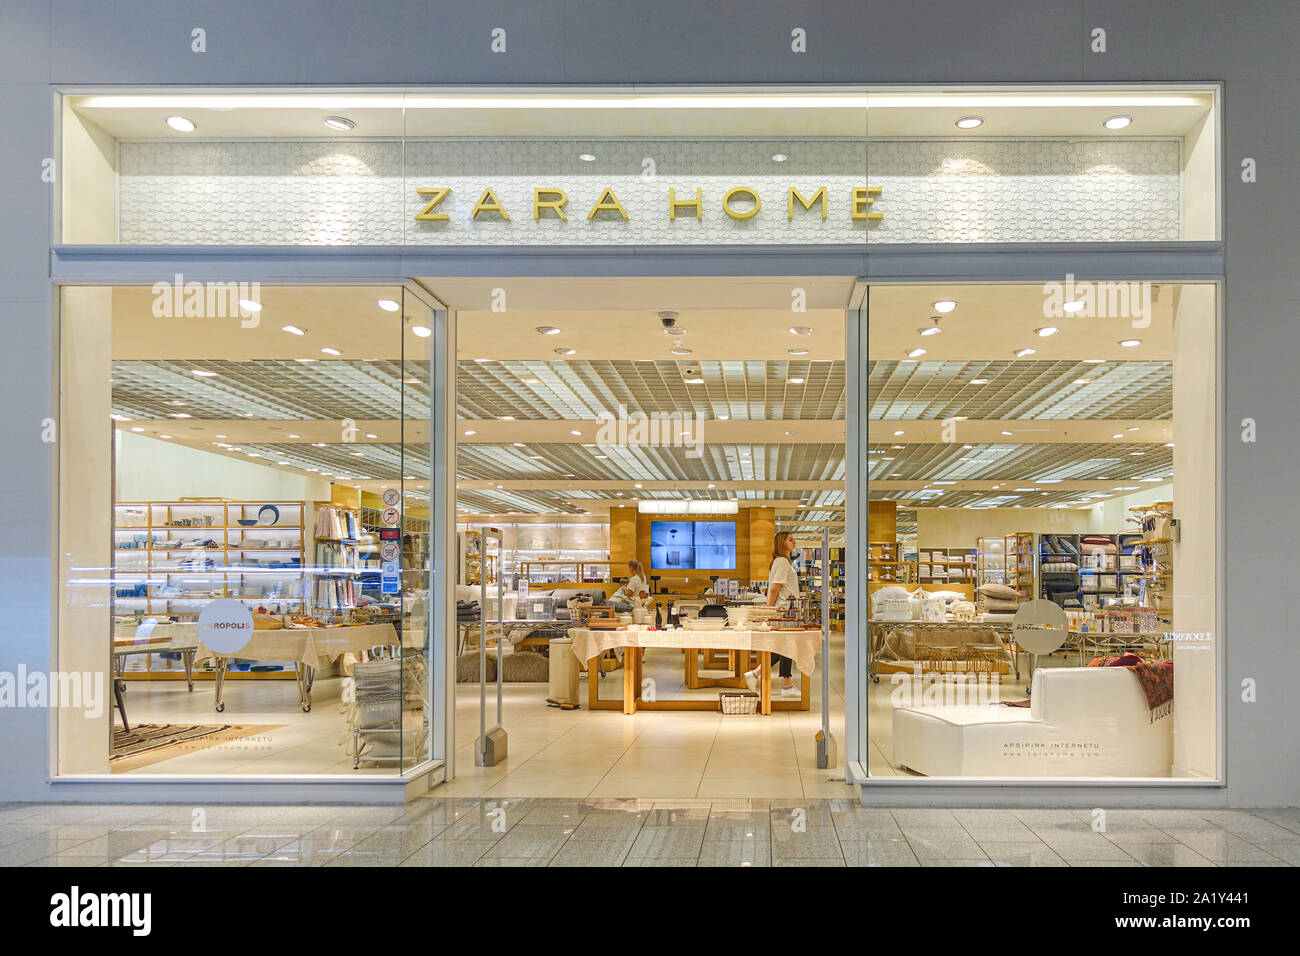 Vilnius, Lithuania - 24 September 2019: Zara Home Store in Vilnius. Zara  Home is Spanish company dedicated to the manufacturing of home textiles  Stock Photo - Alamy